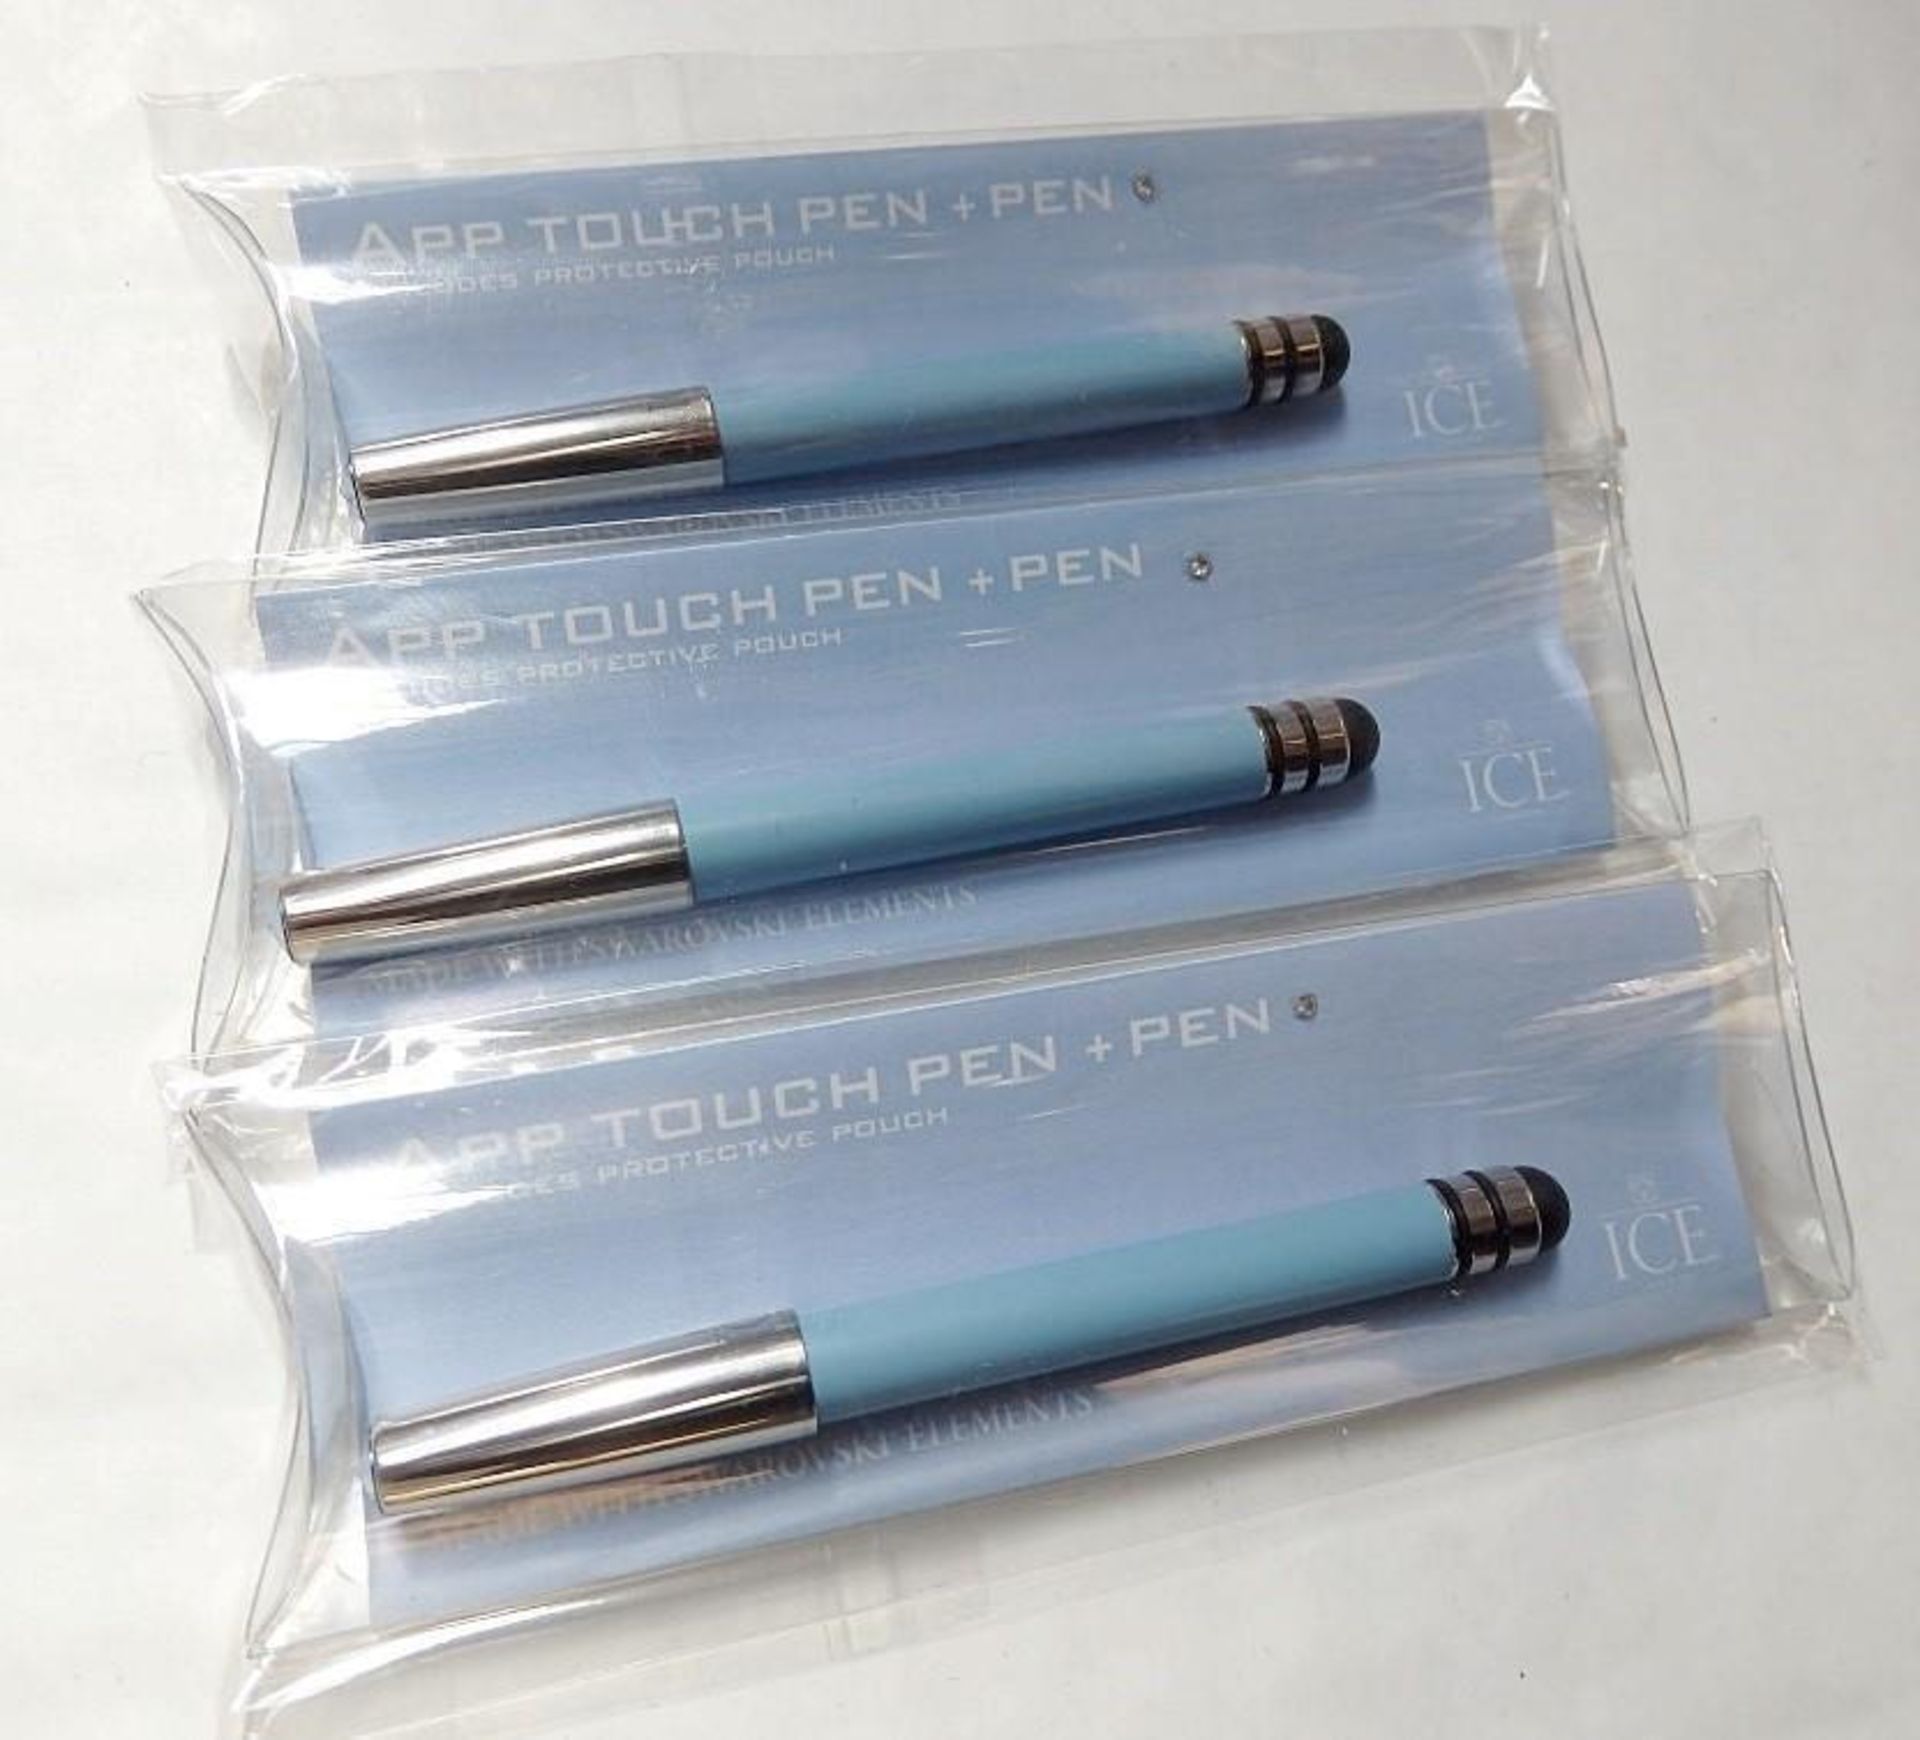 10 x ICE LONDON App Pen Duo - Touch Stylus And Ink Pen Combined - Colour: LIGHT BLUE - MADE WITH SWA - Image 3 of 4